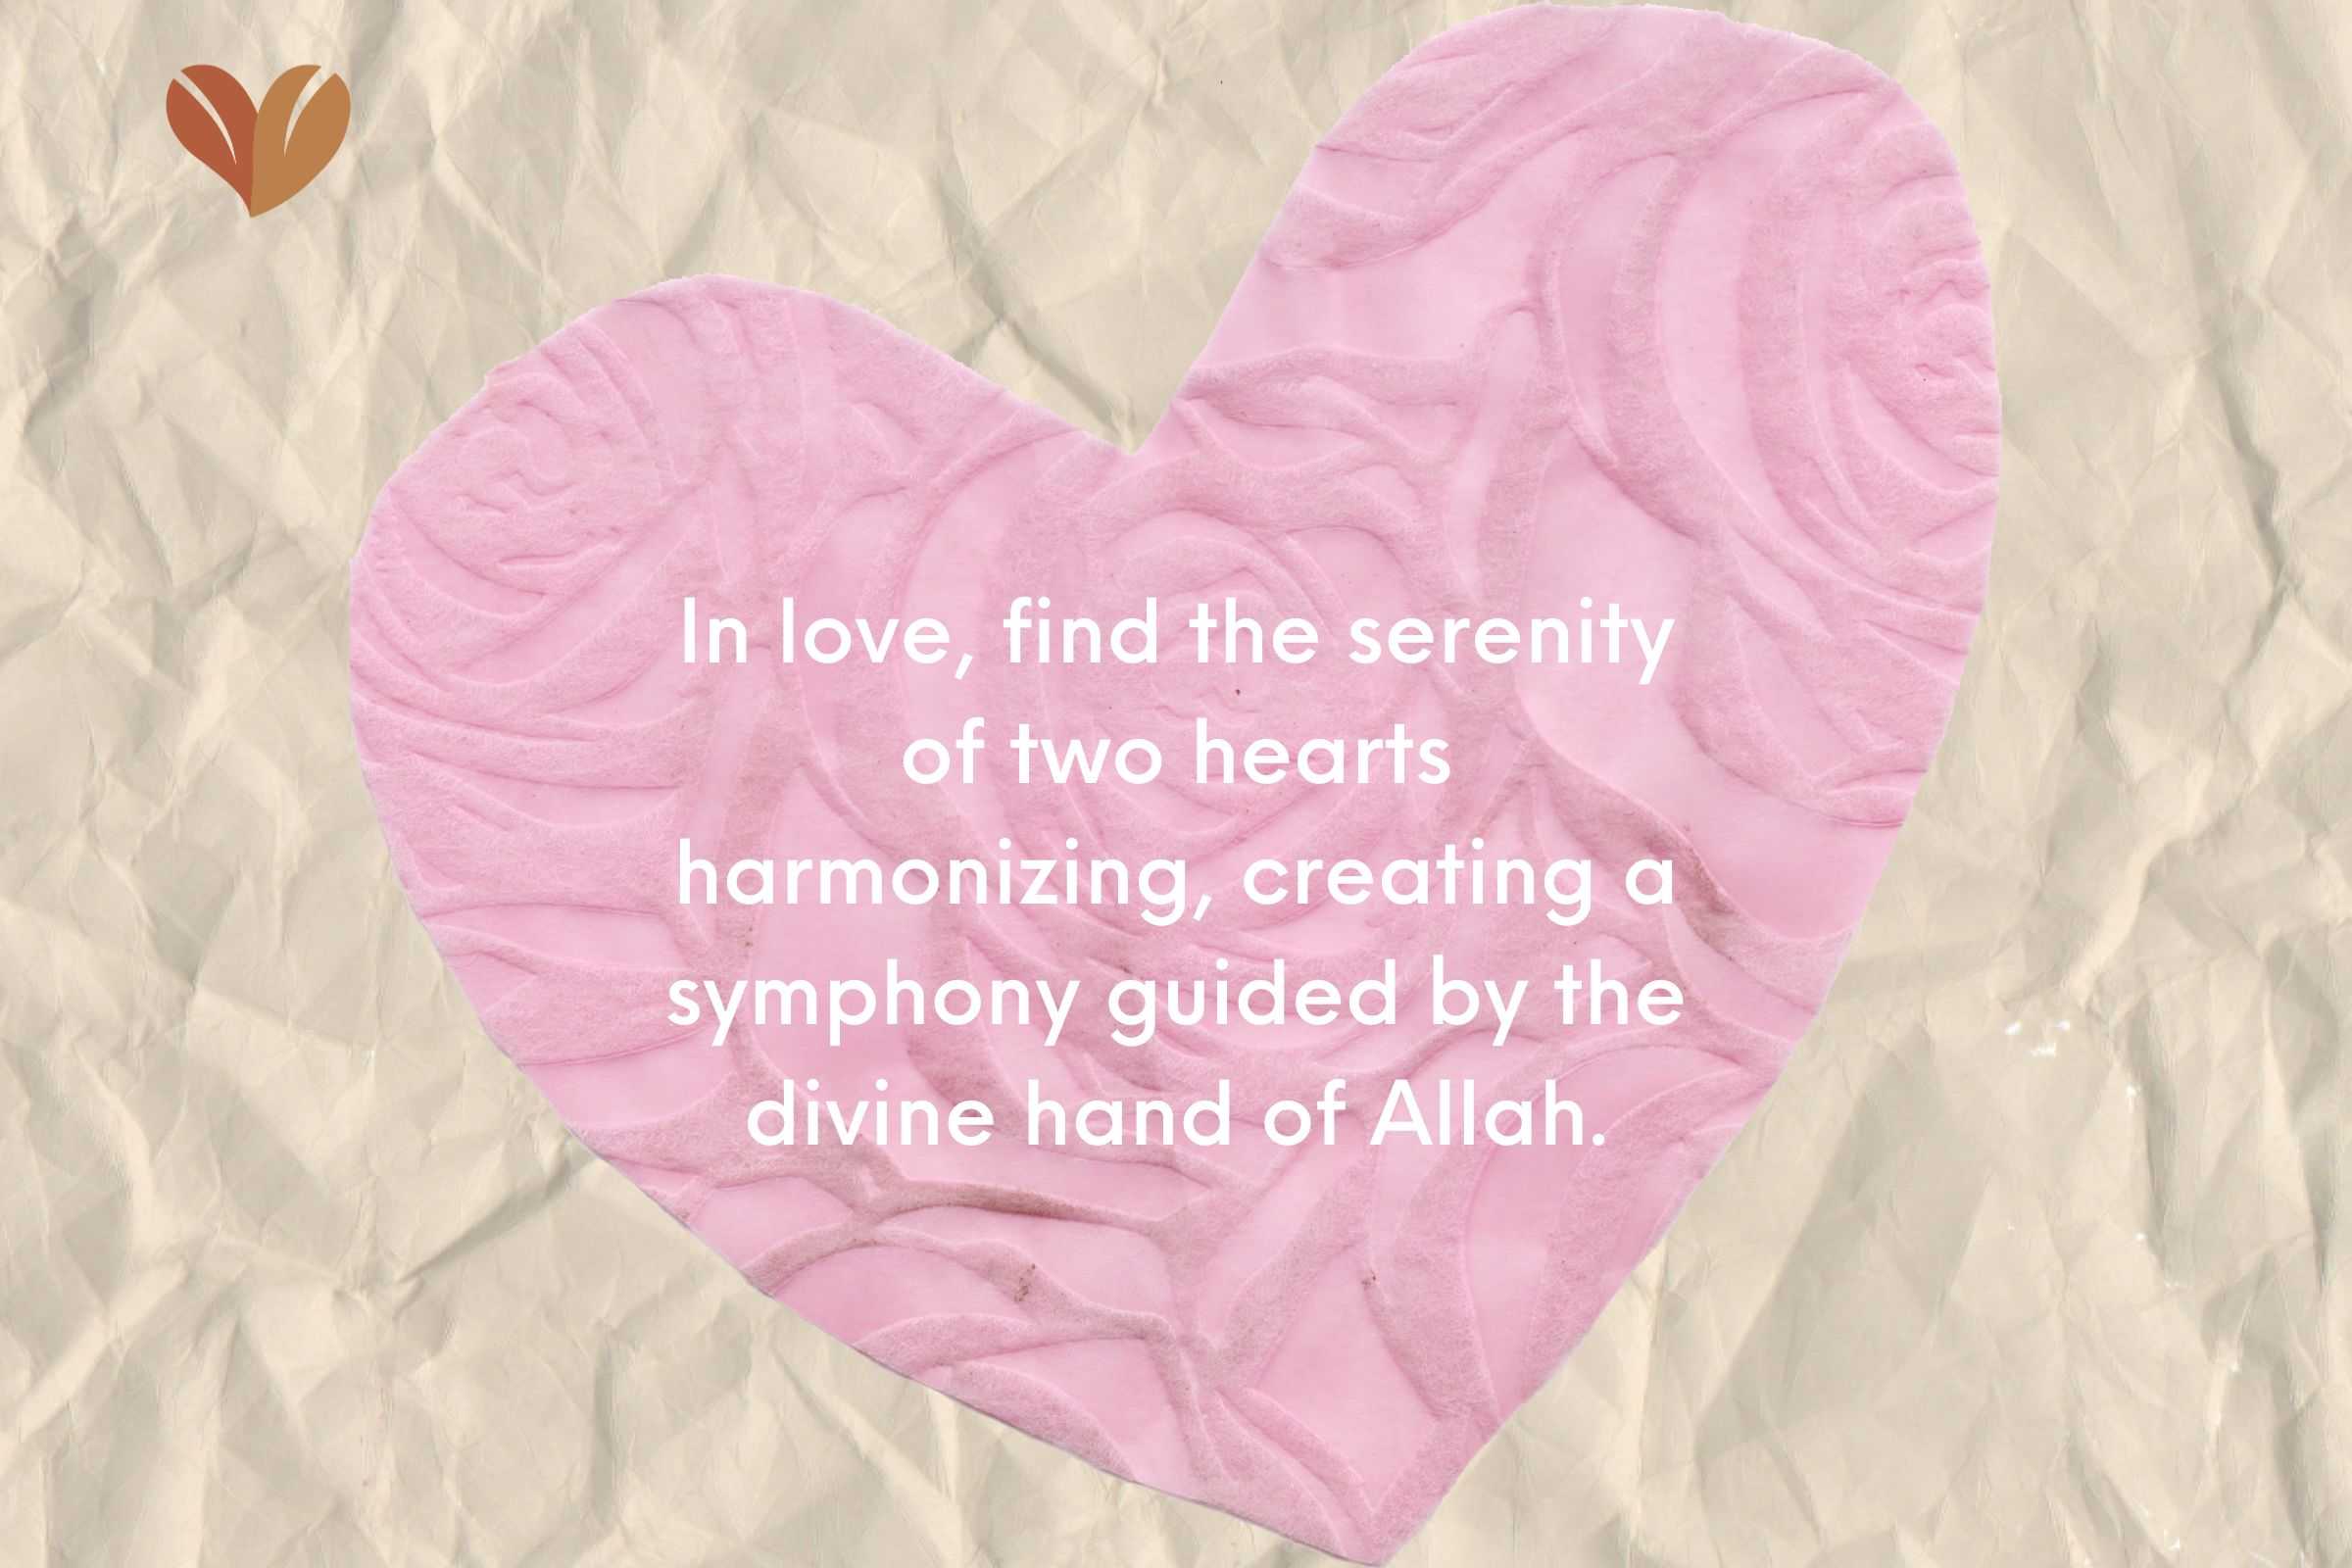 In love, find the serenity of two hearts harmonizing, creating a symphony guided by the divine hand of Allah